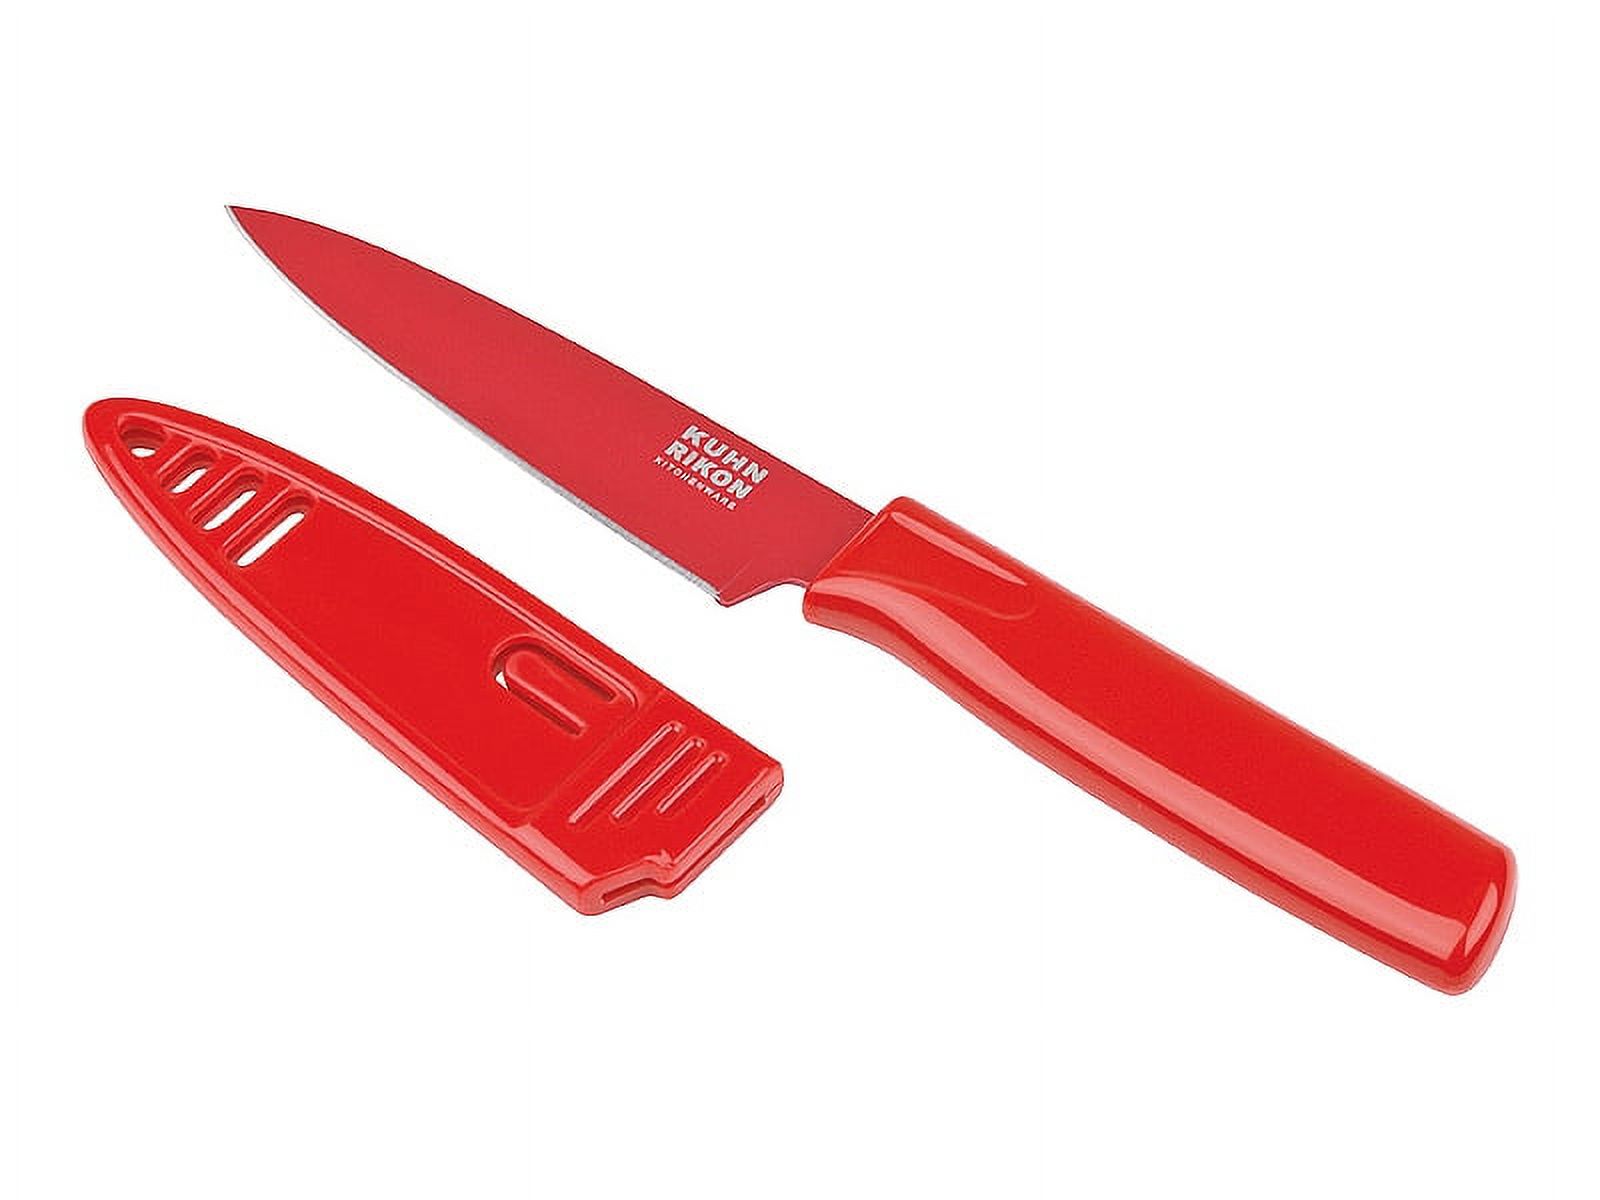 Kuhn Rikon Colori 4 Inch Paring Knife With Sheath Red - image 1 of 4